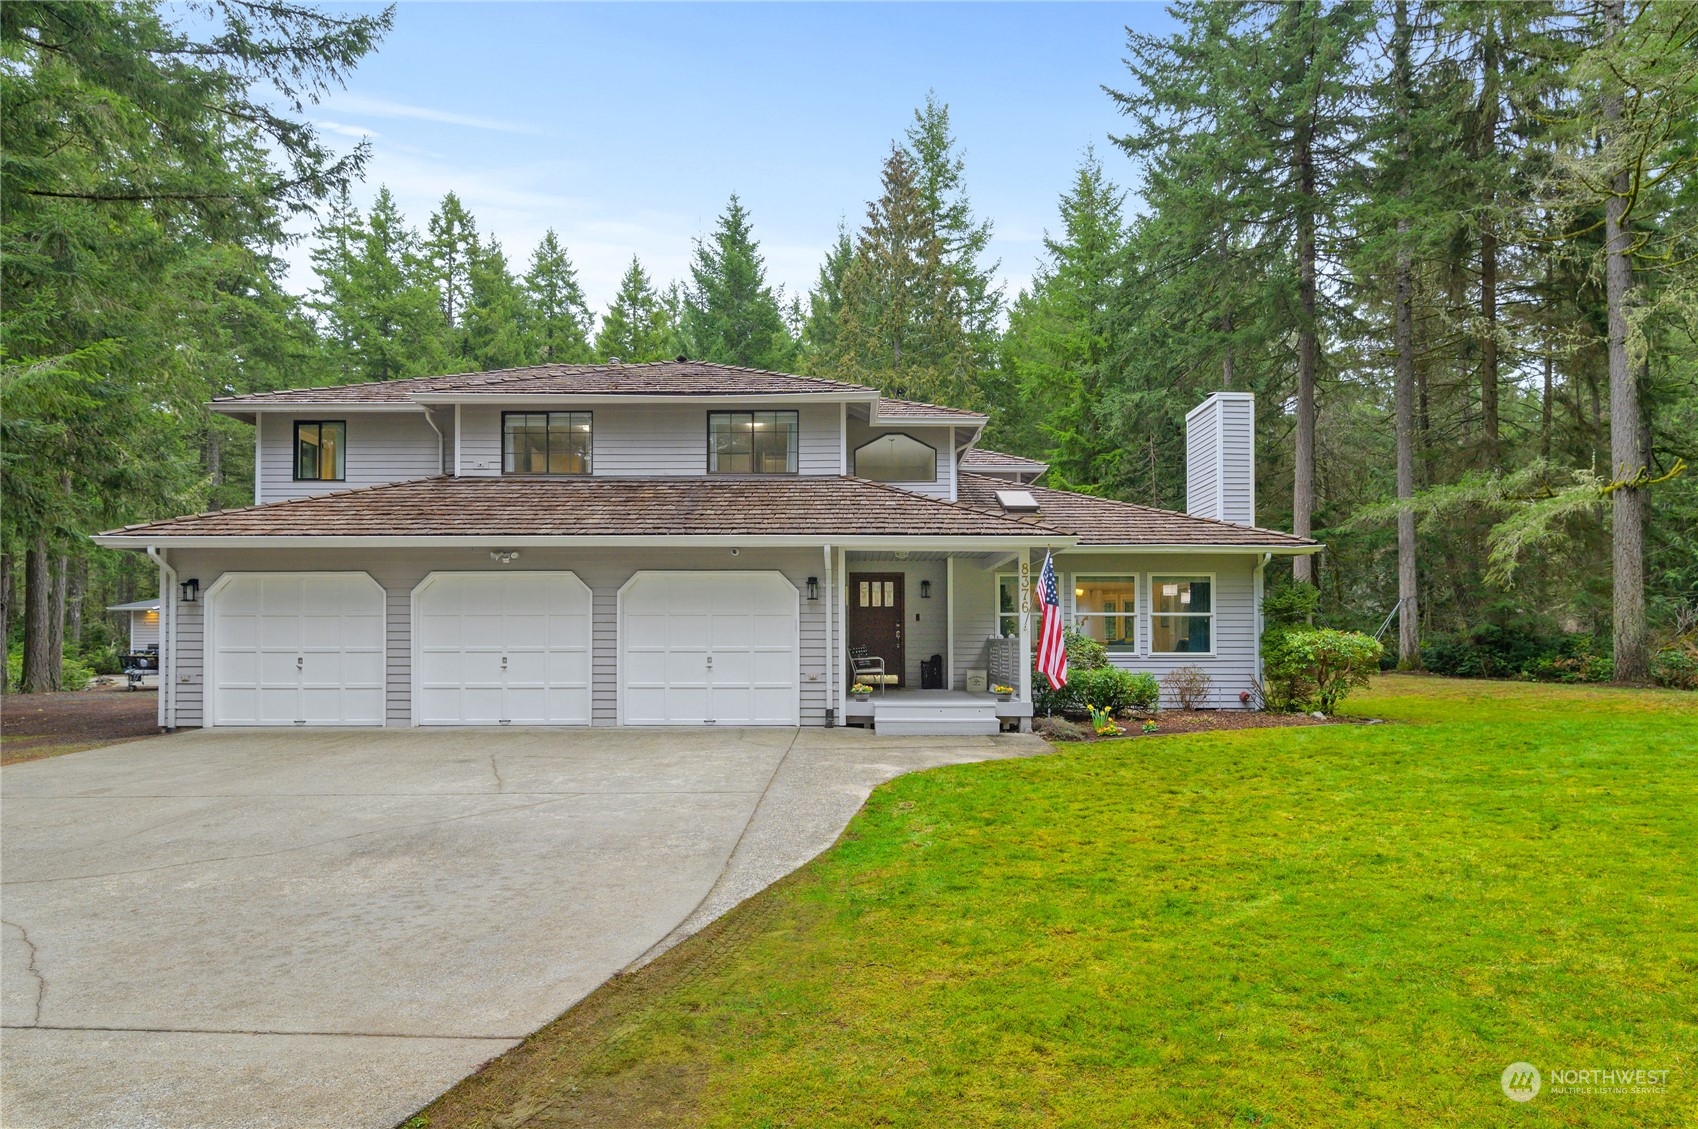 Houses for Sale in Kitsap County